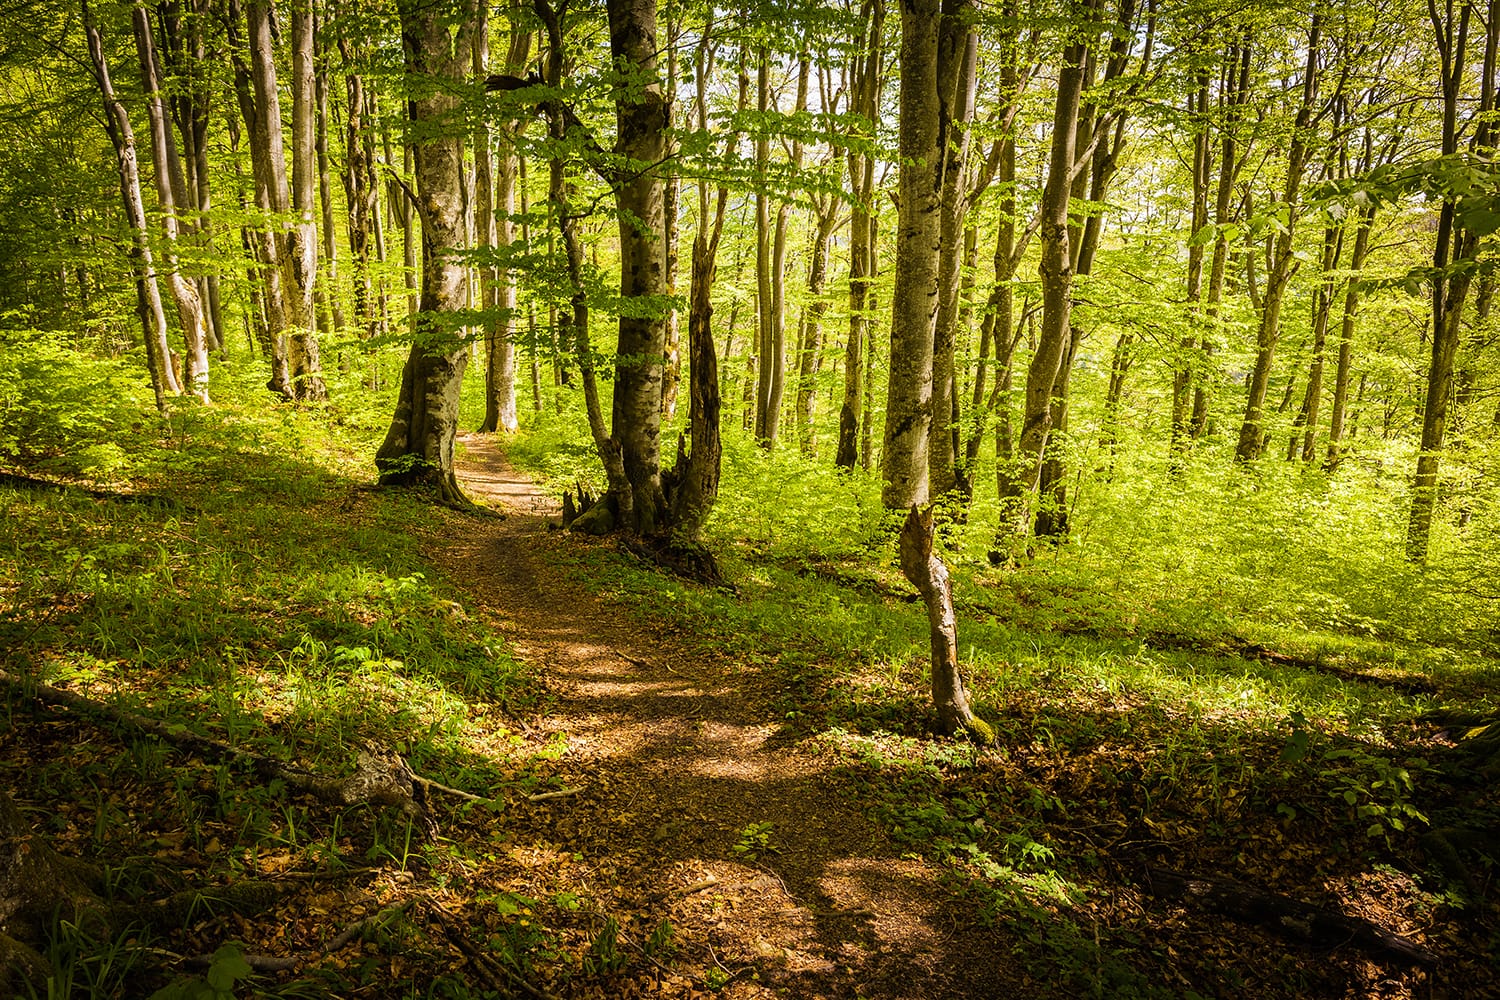 Hiking trail winding across green forest in early morning light, Plitvice Lakes National Park, Croatia